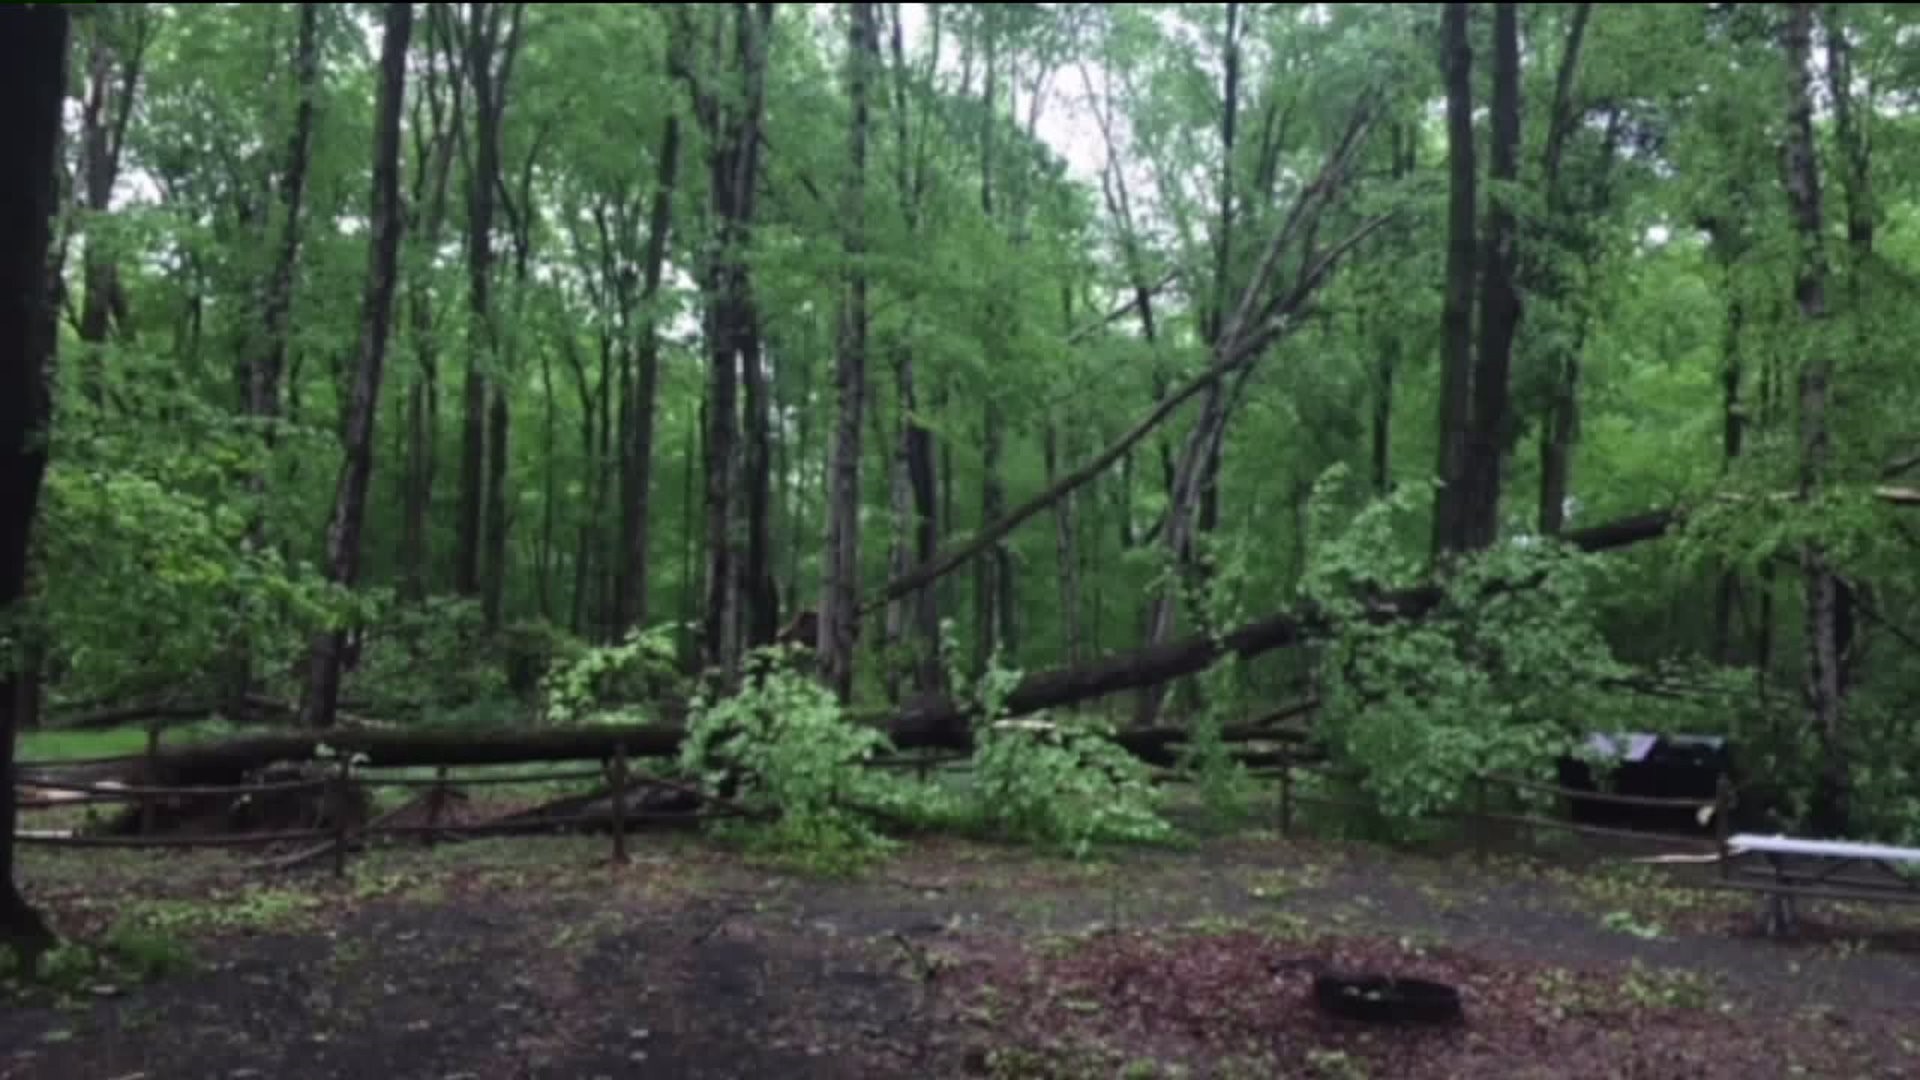 Storm Damage at Delaware Water Gap National Recreation Area Closes Paths, Campgrounds